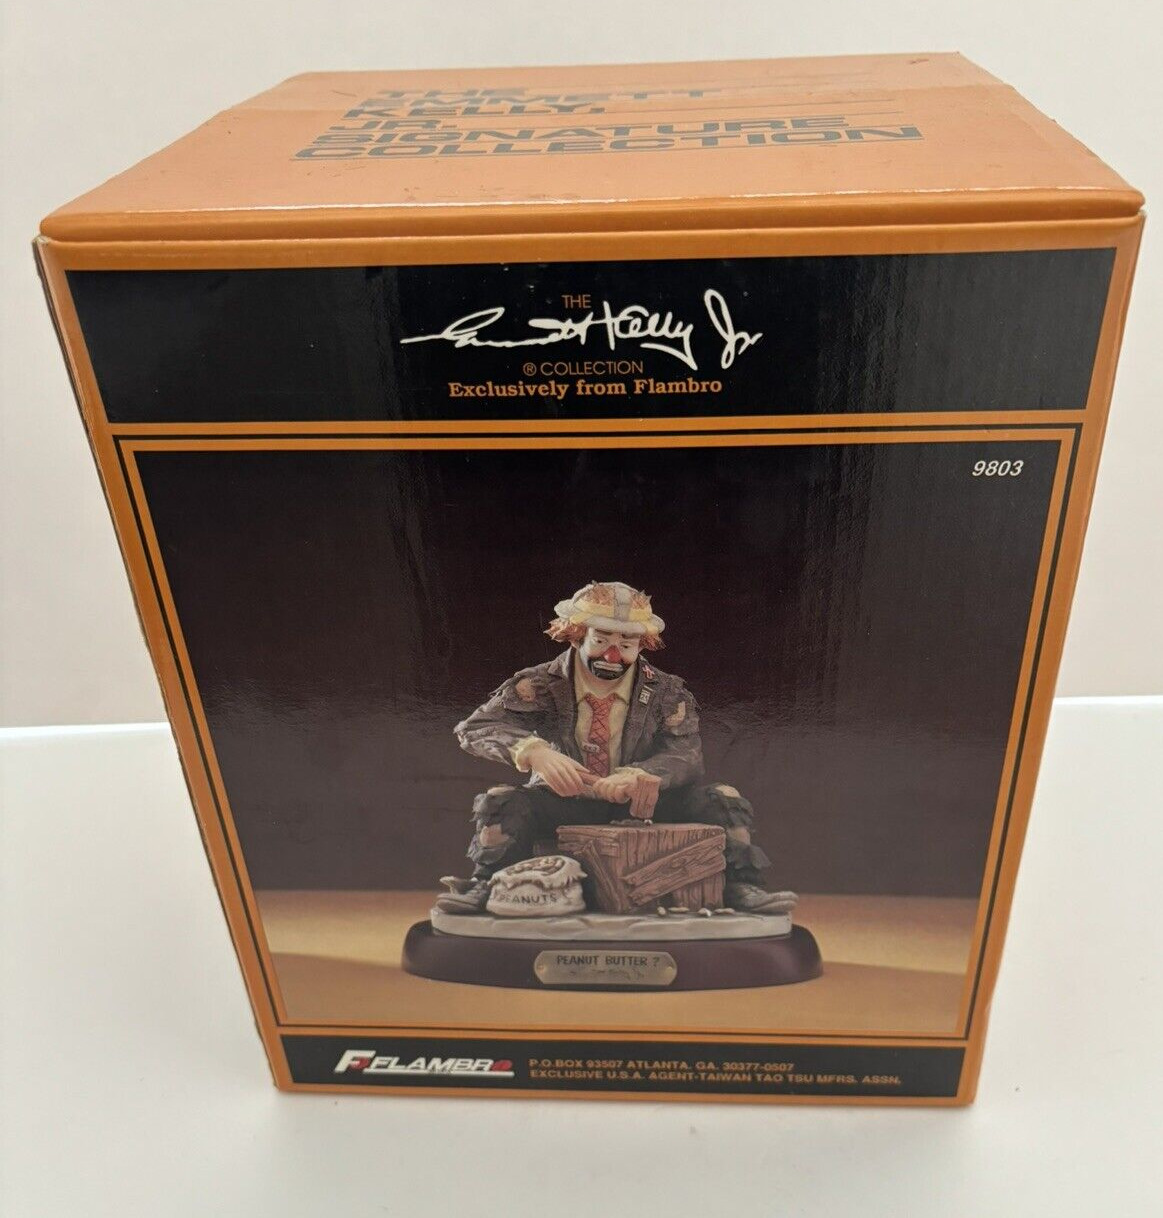 The Emmett Kelly Jr. Signature Collection - #9803 - Peanut Butter - New in Box